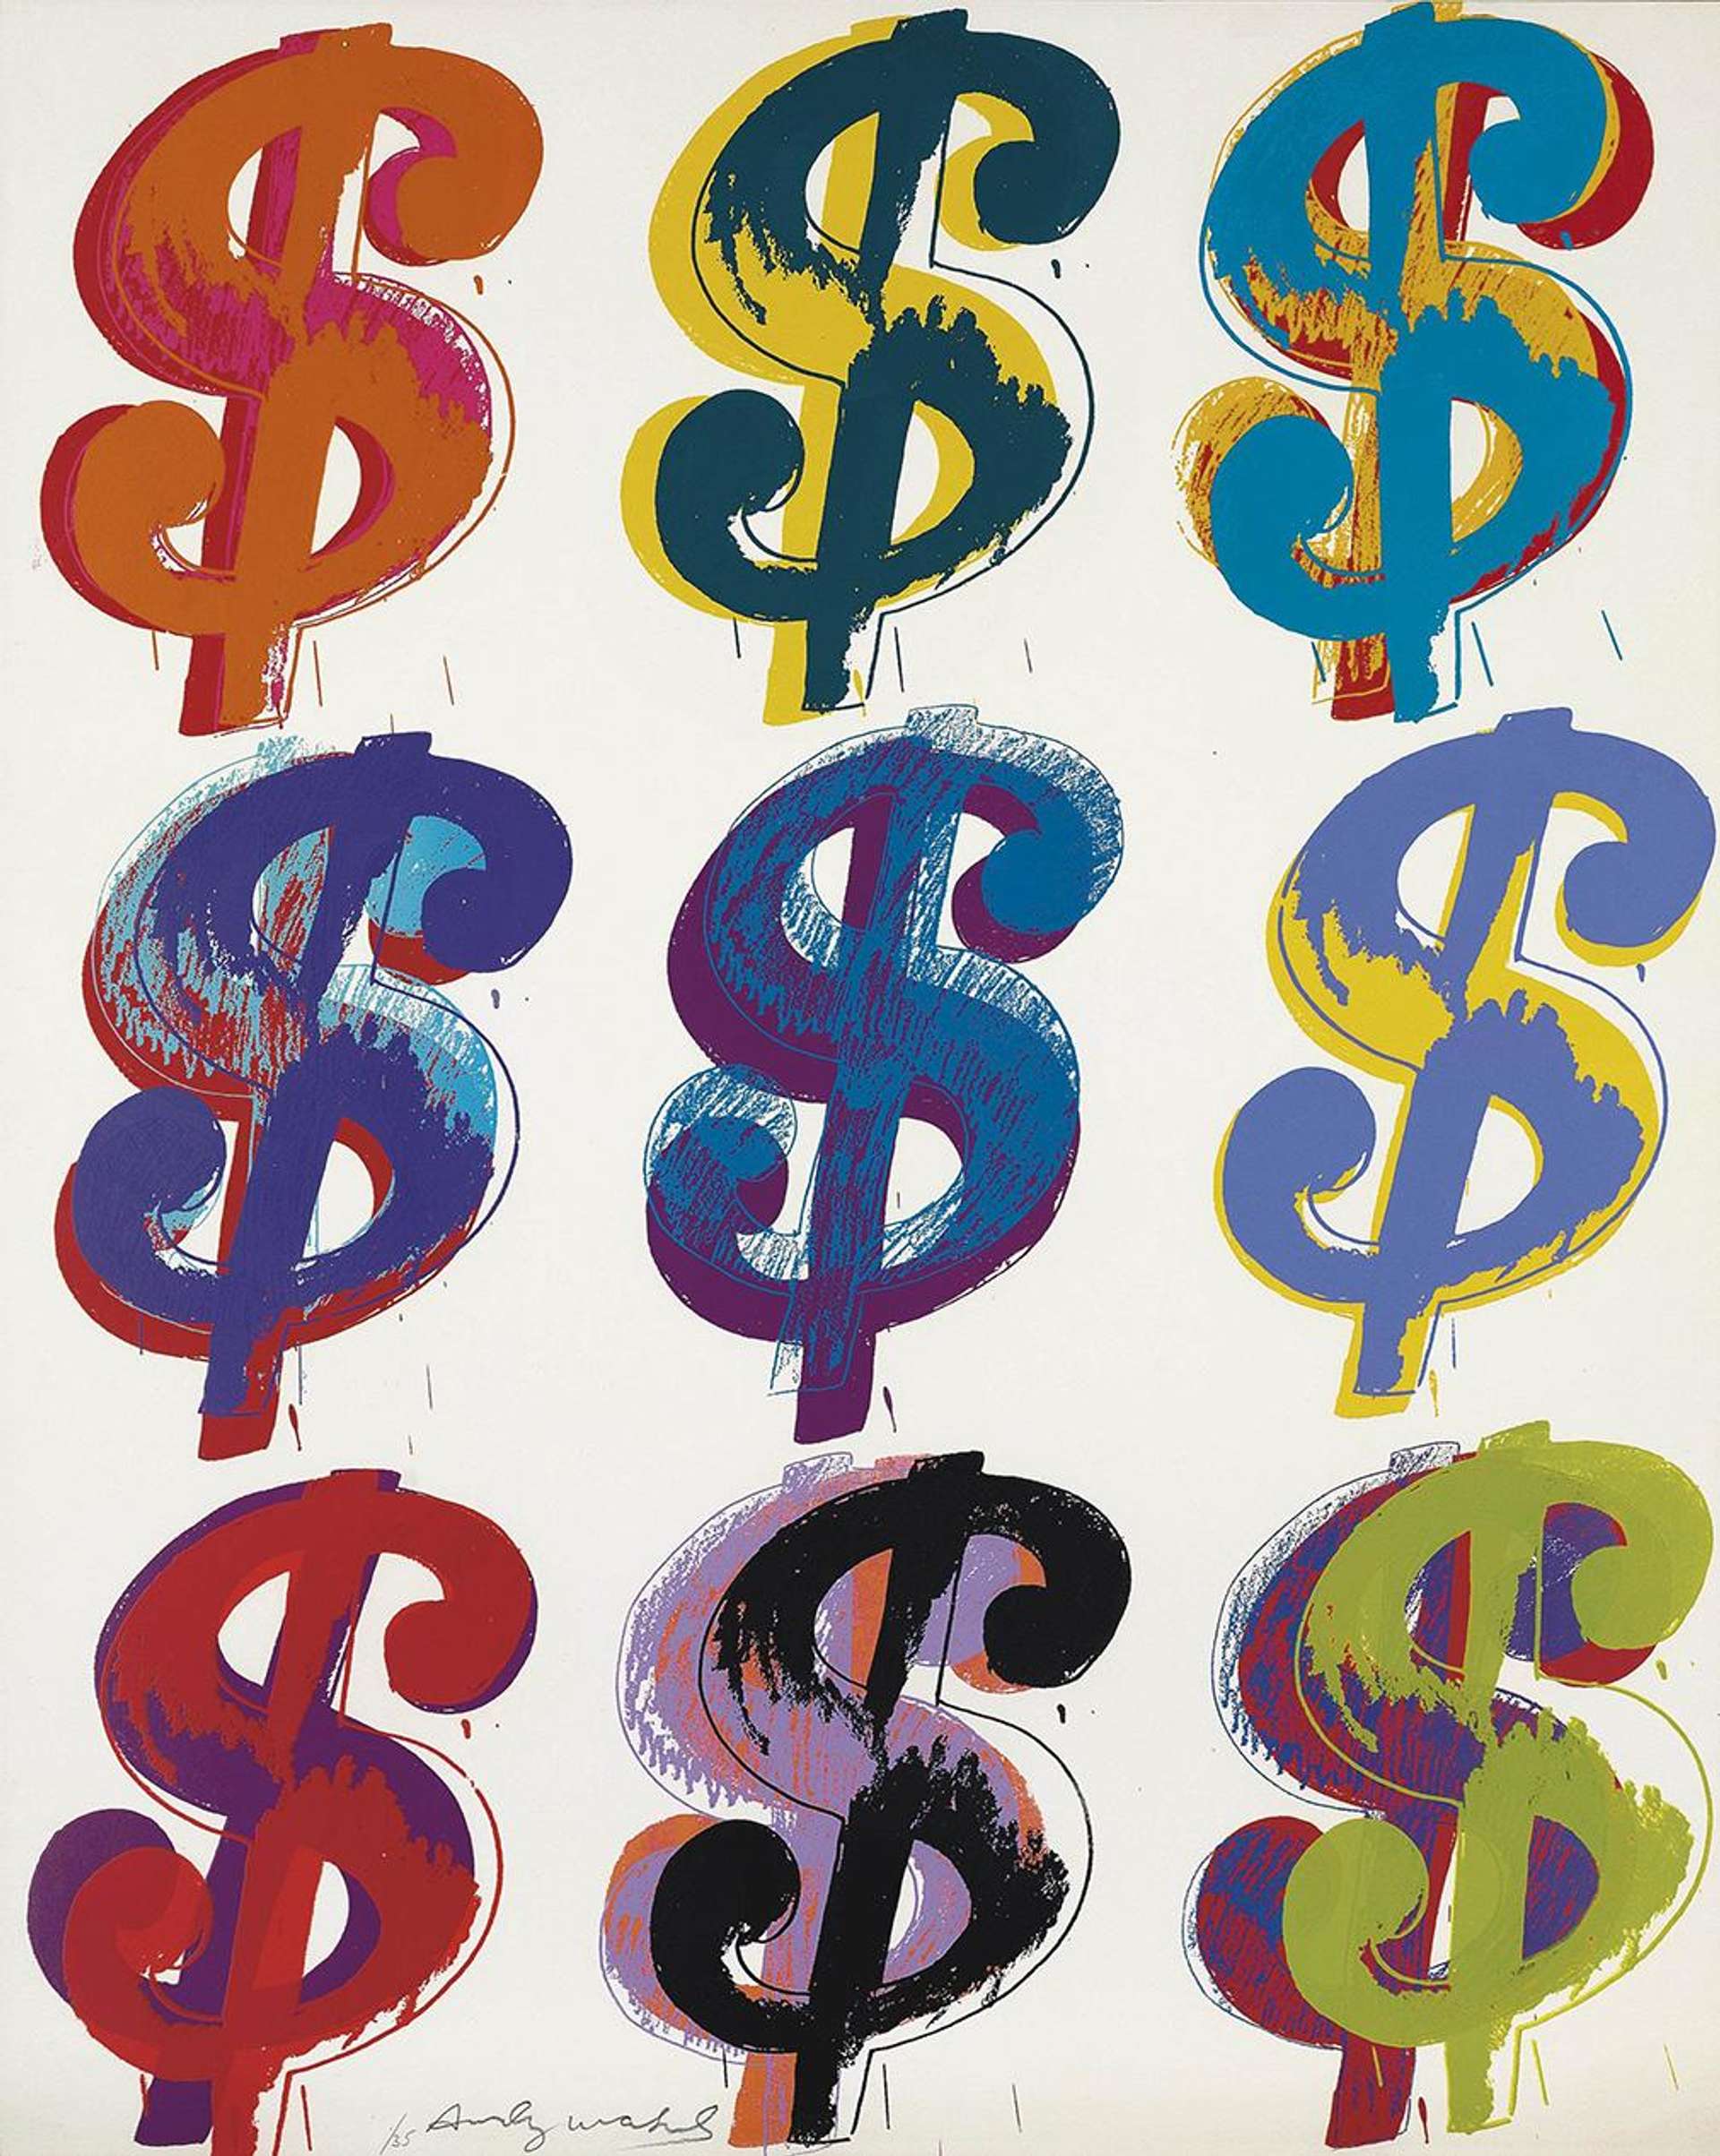 Six dollar signs are printed in a pattern, in three rows of three, against a white background. Each of the dollar signs is printed in a different colour, and overlaid with different layers of colour to create tone and texture.